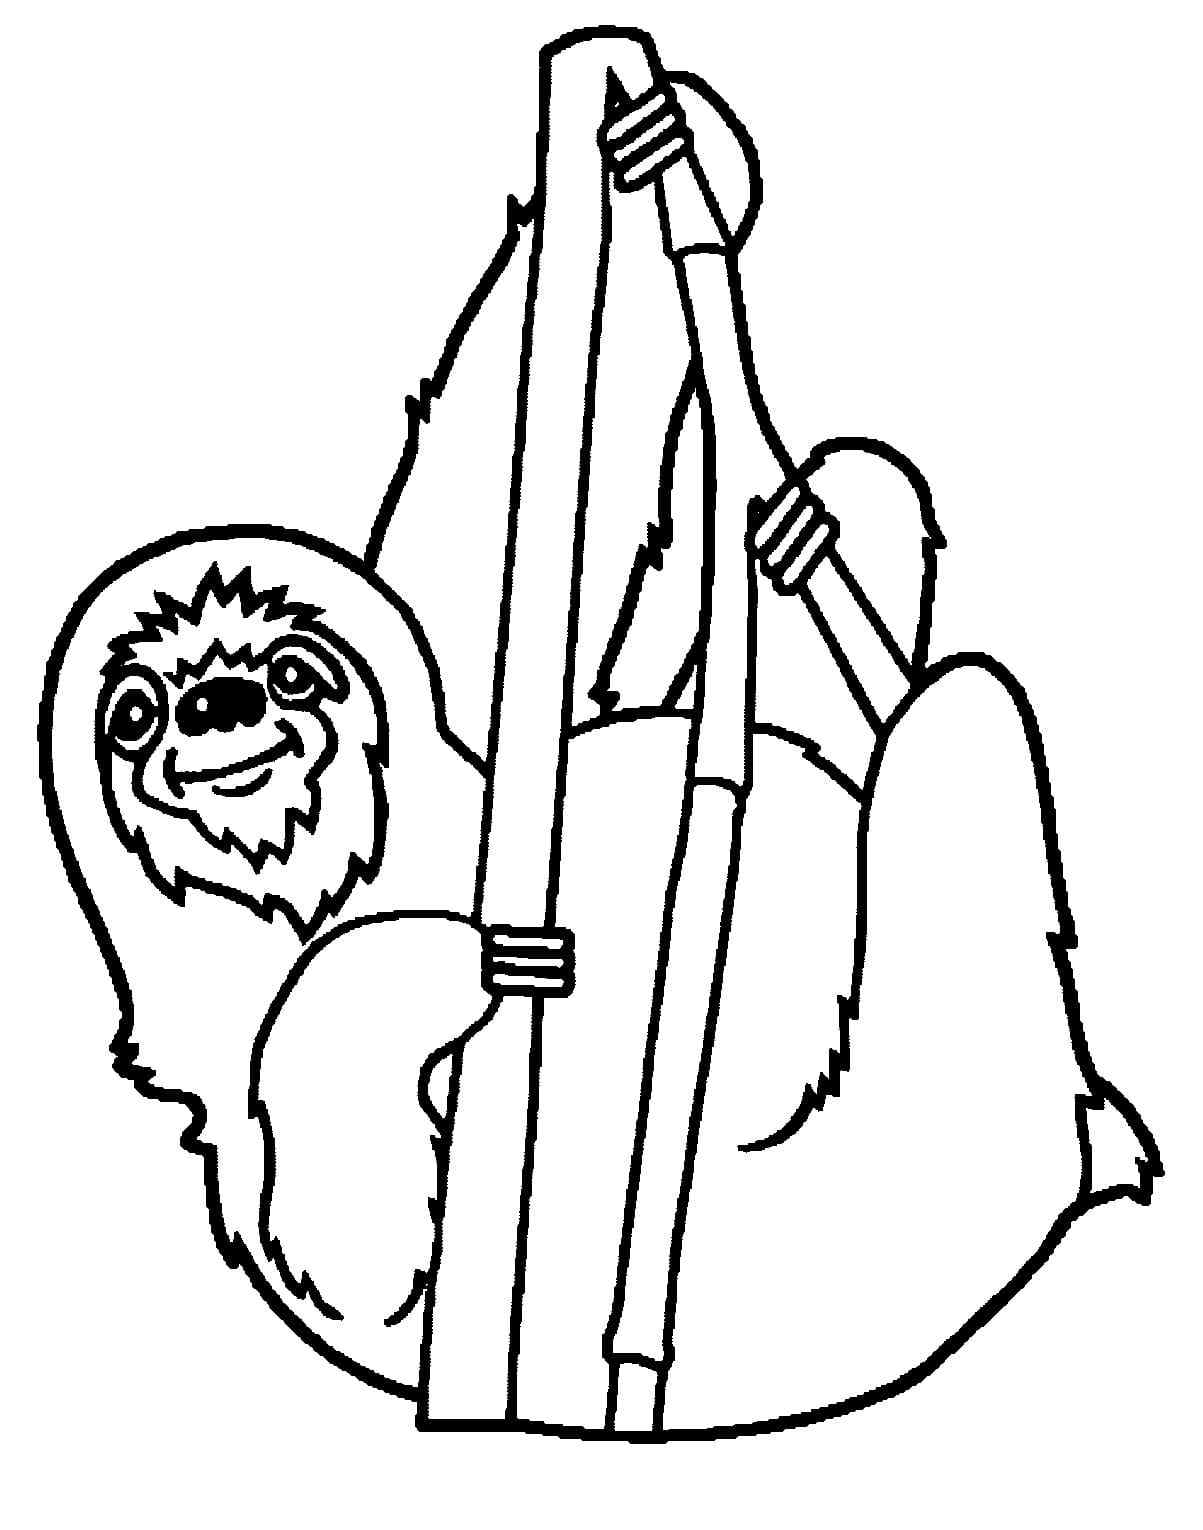 Three-toed Sloth Hung On A Branch Coloring Page